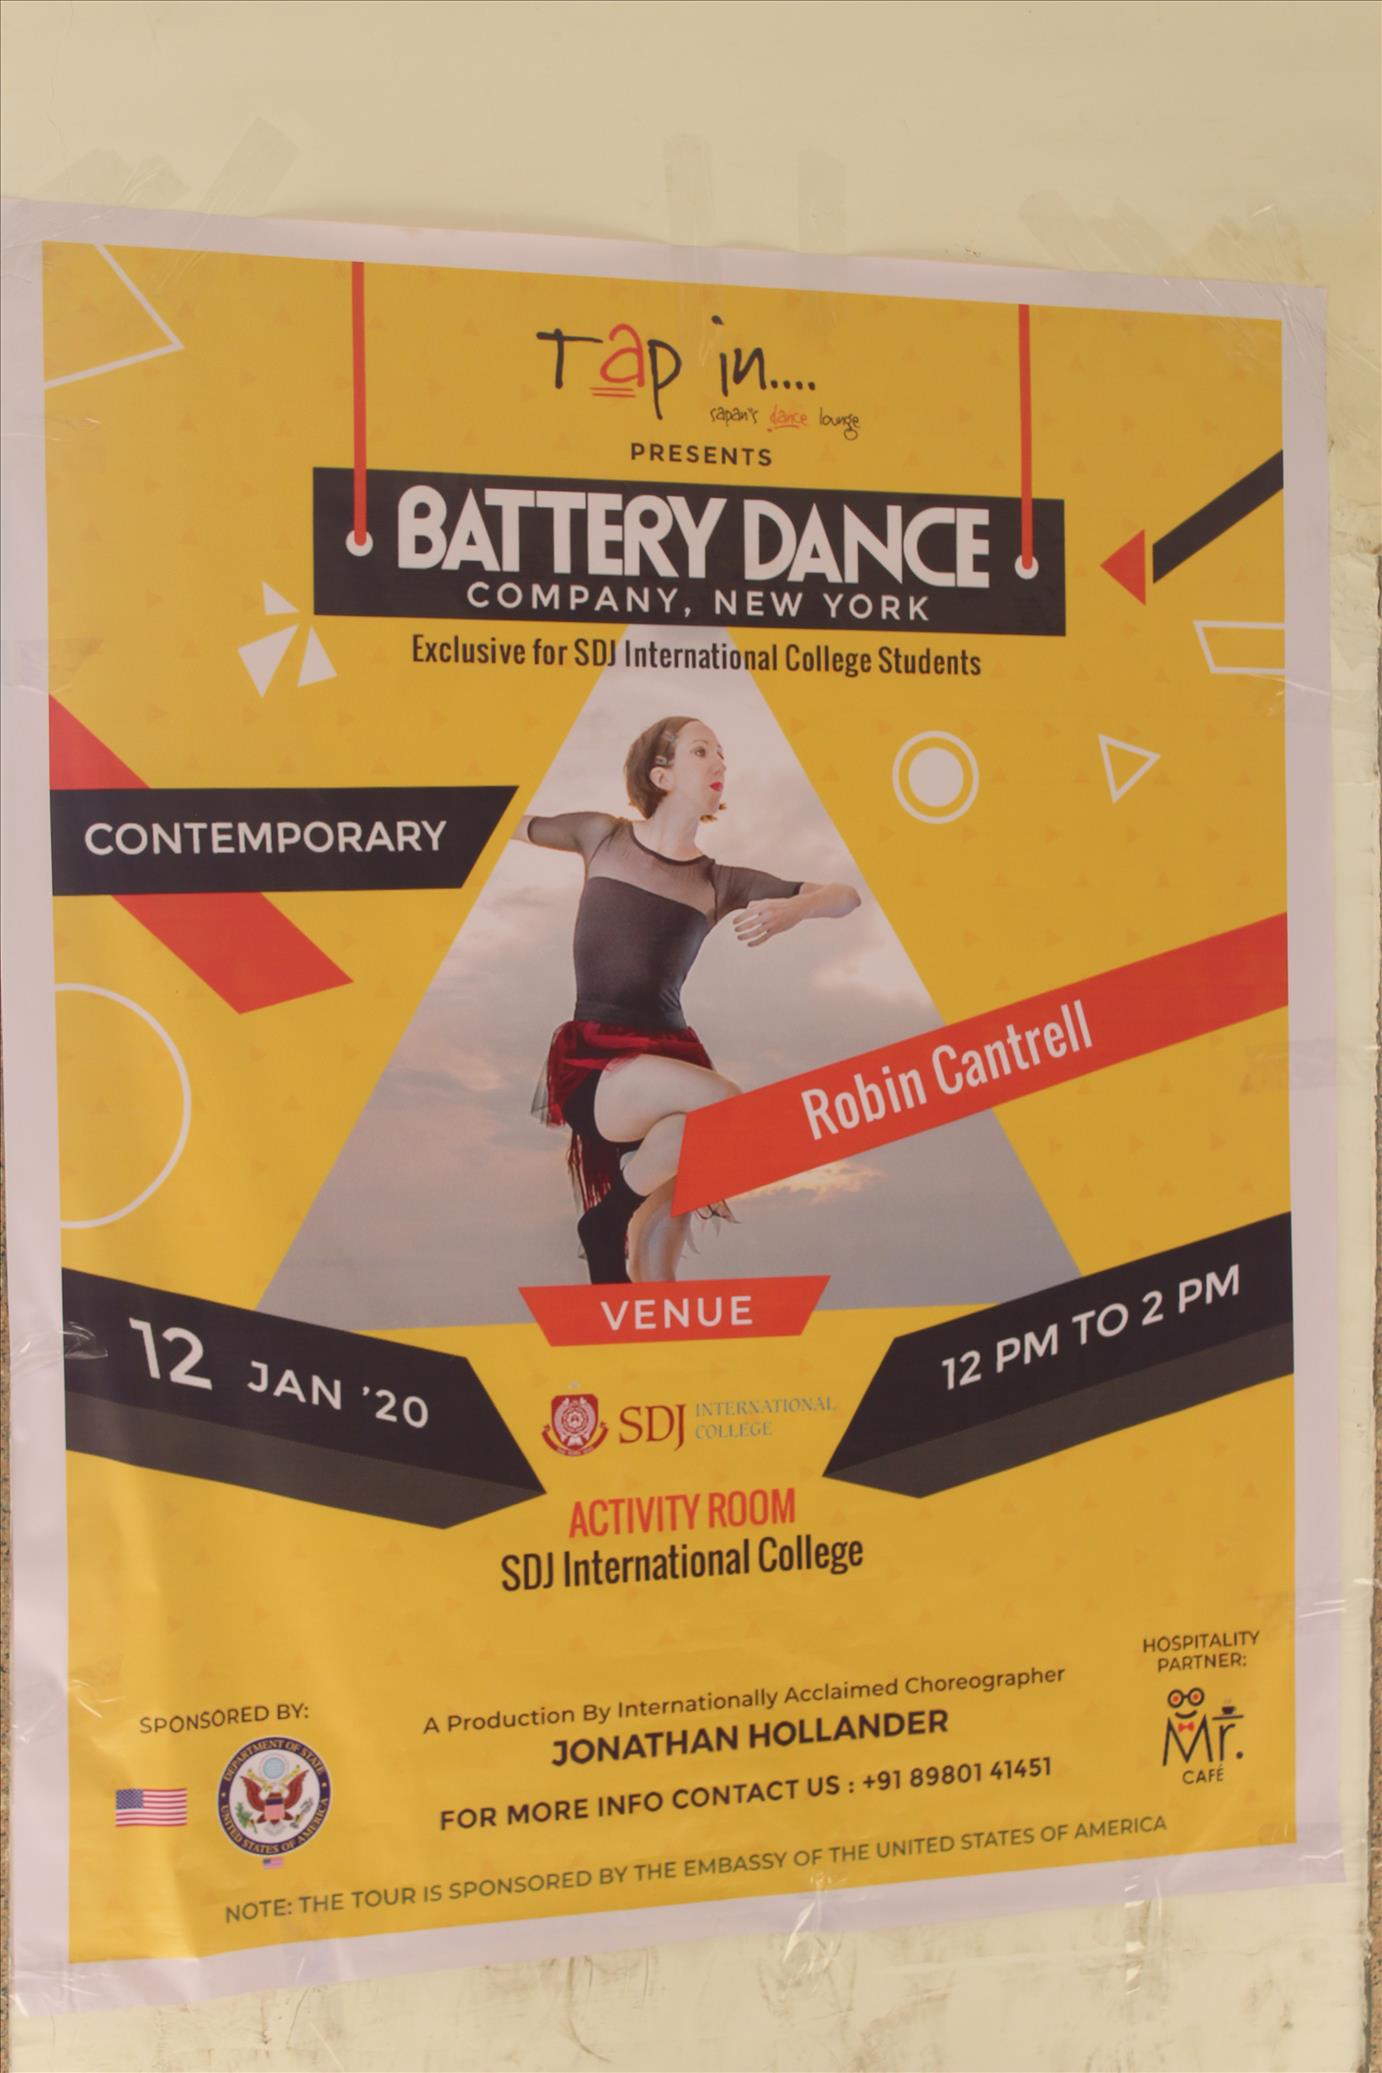 “Workshop on Contemporary Dance by Battery Dance Company, New York” organized by 5678 Club